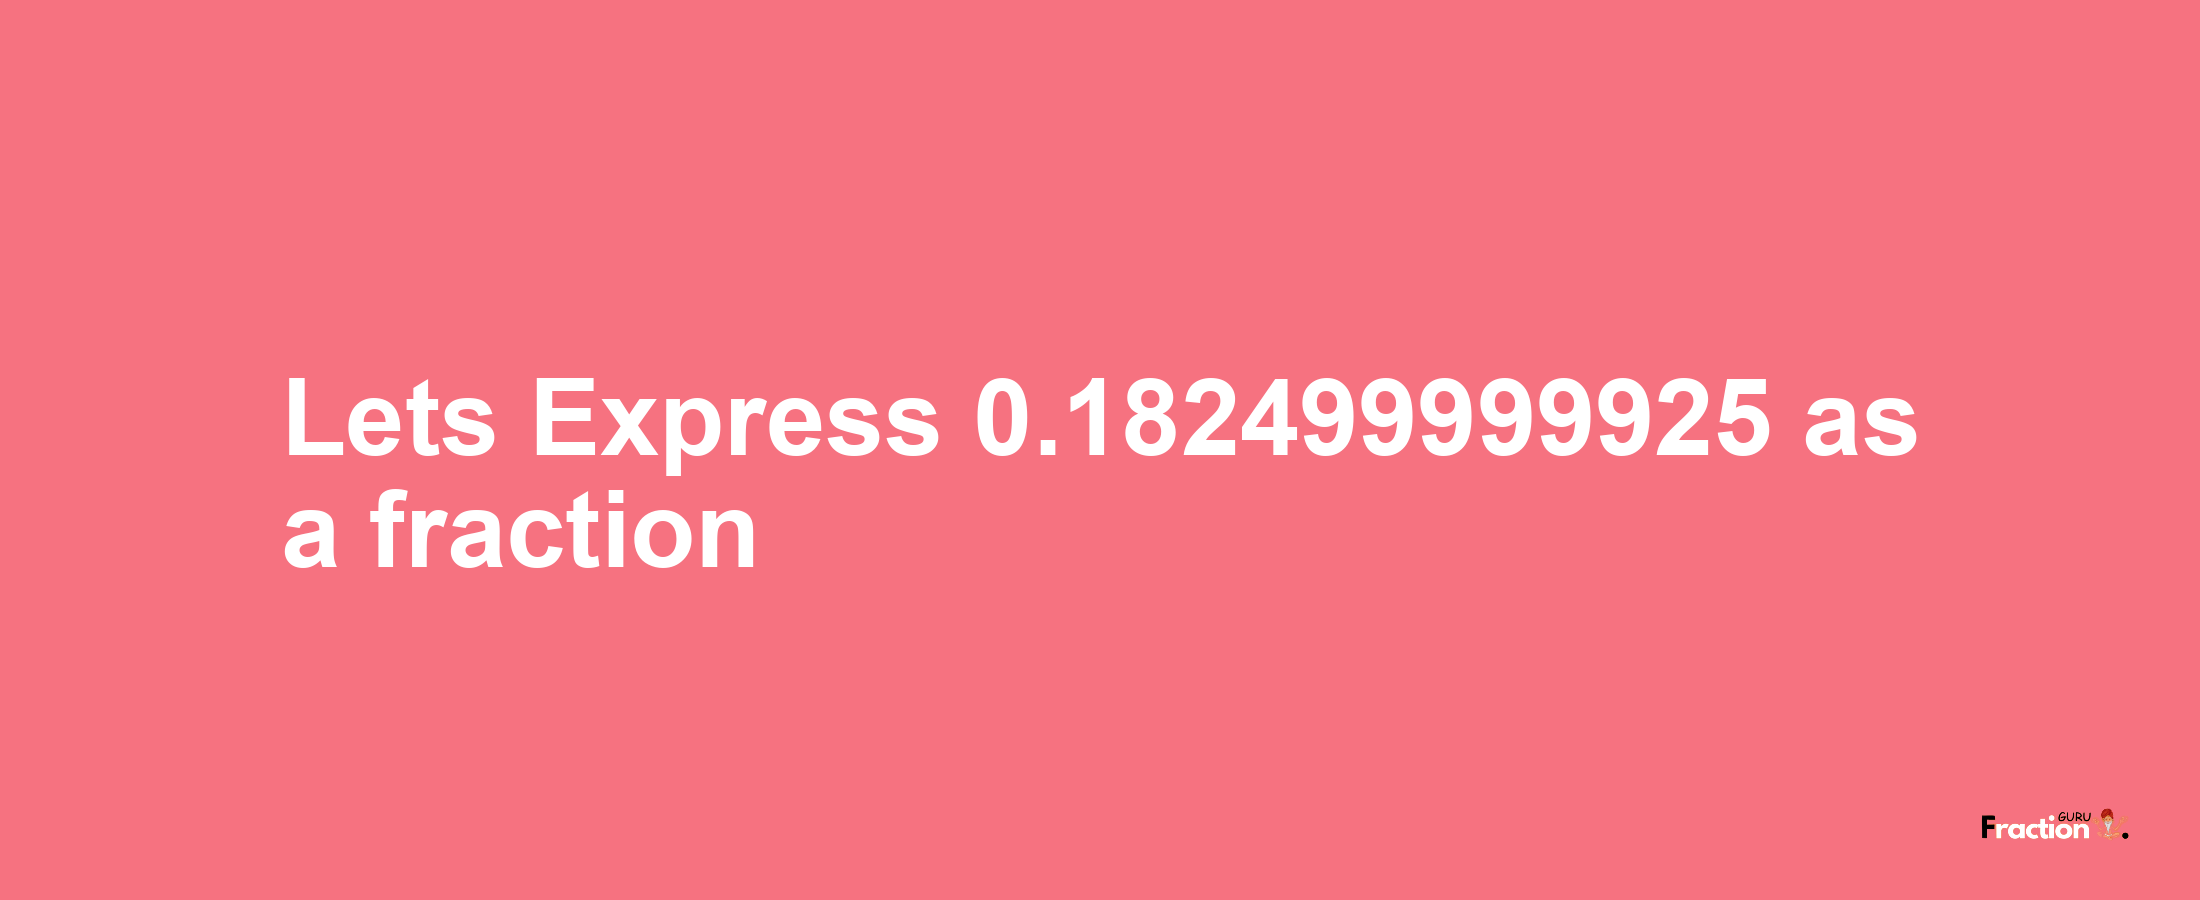 Lets Express 0.182499999925 as afraction